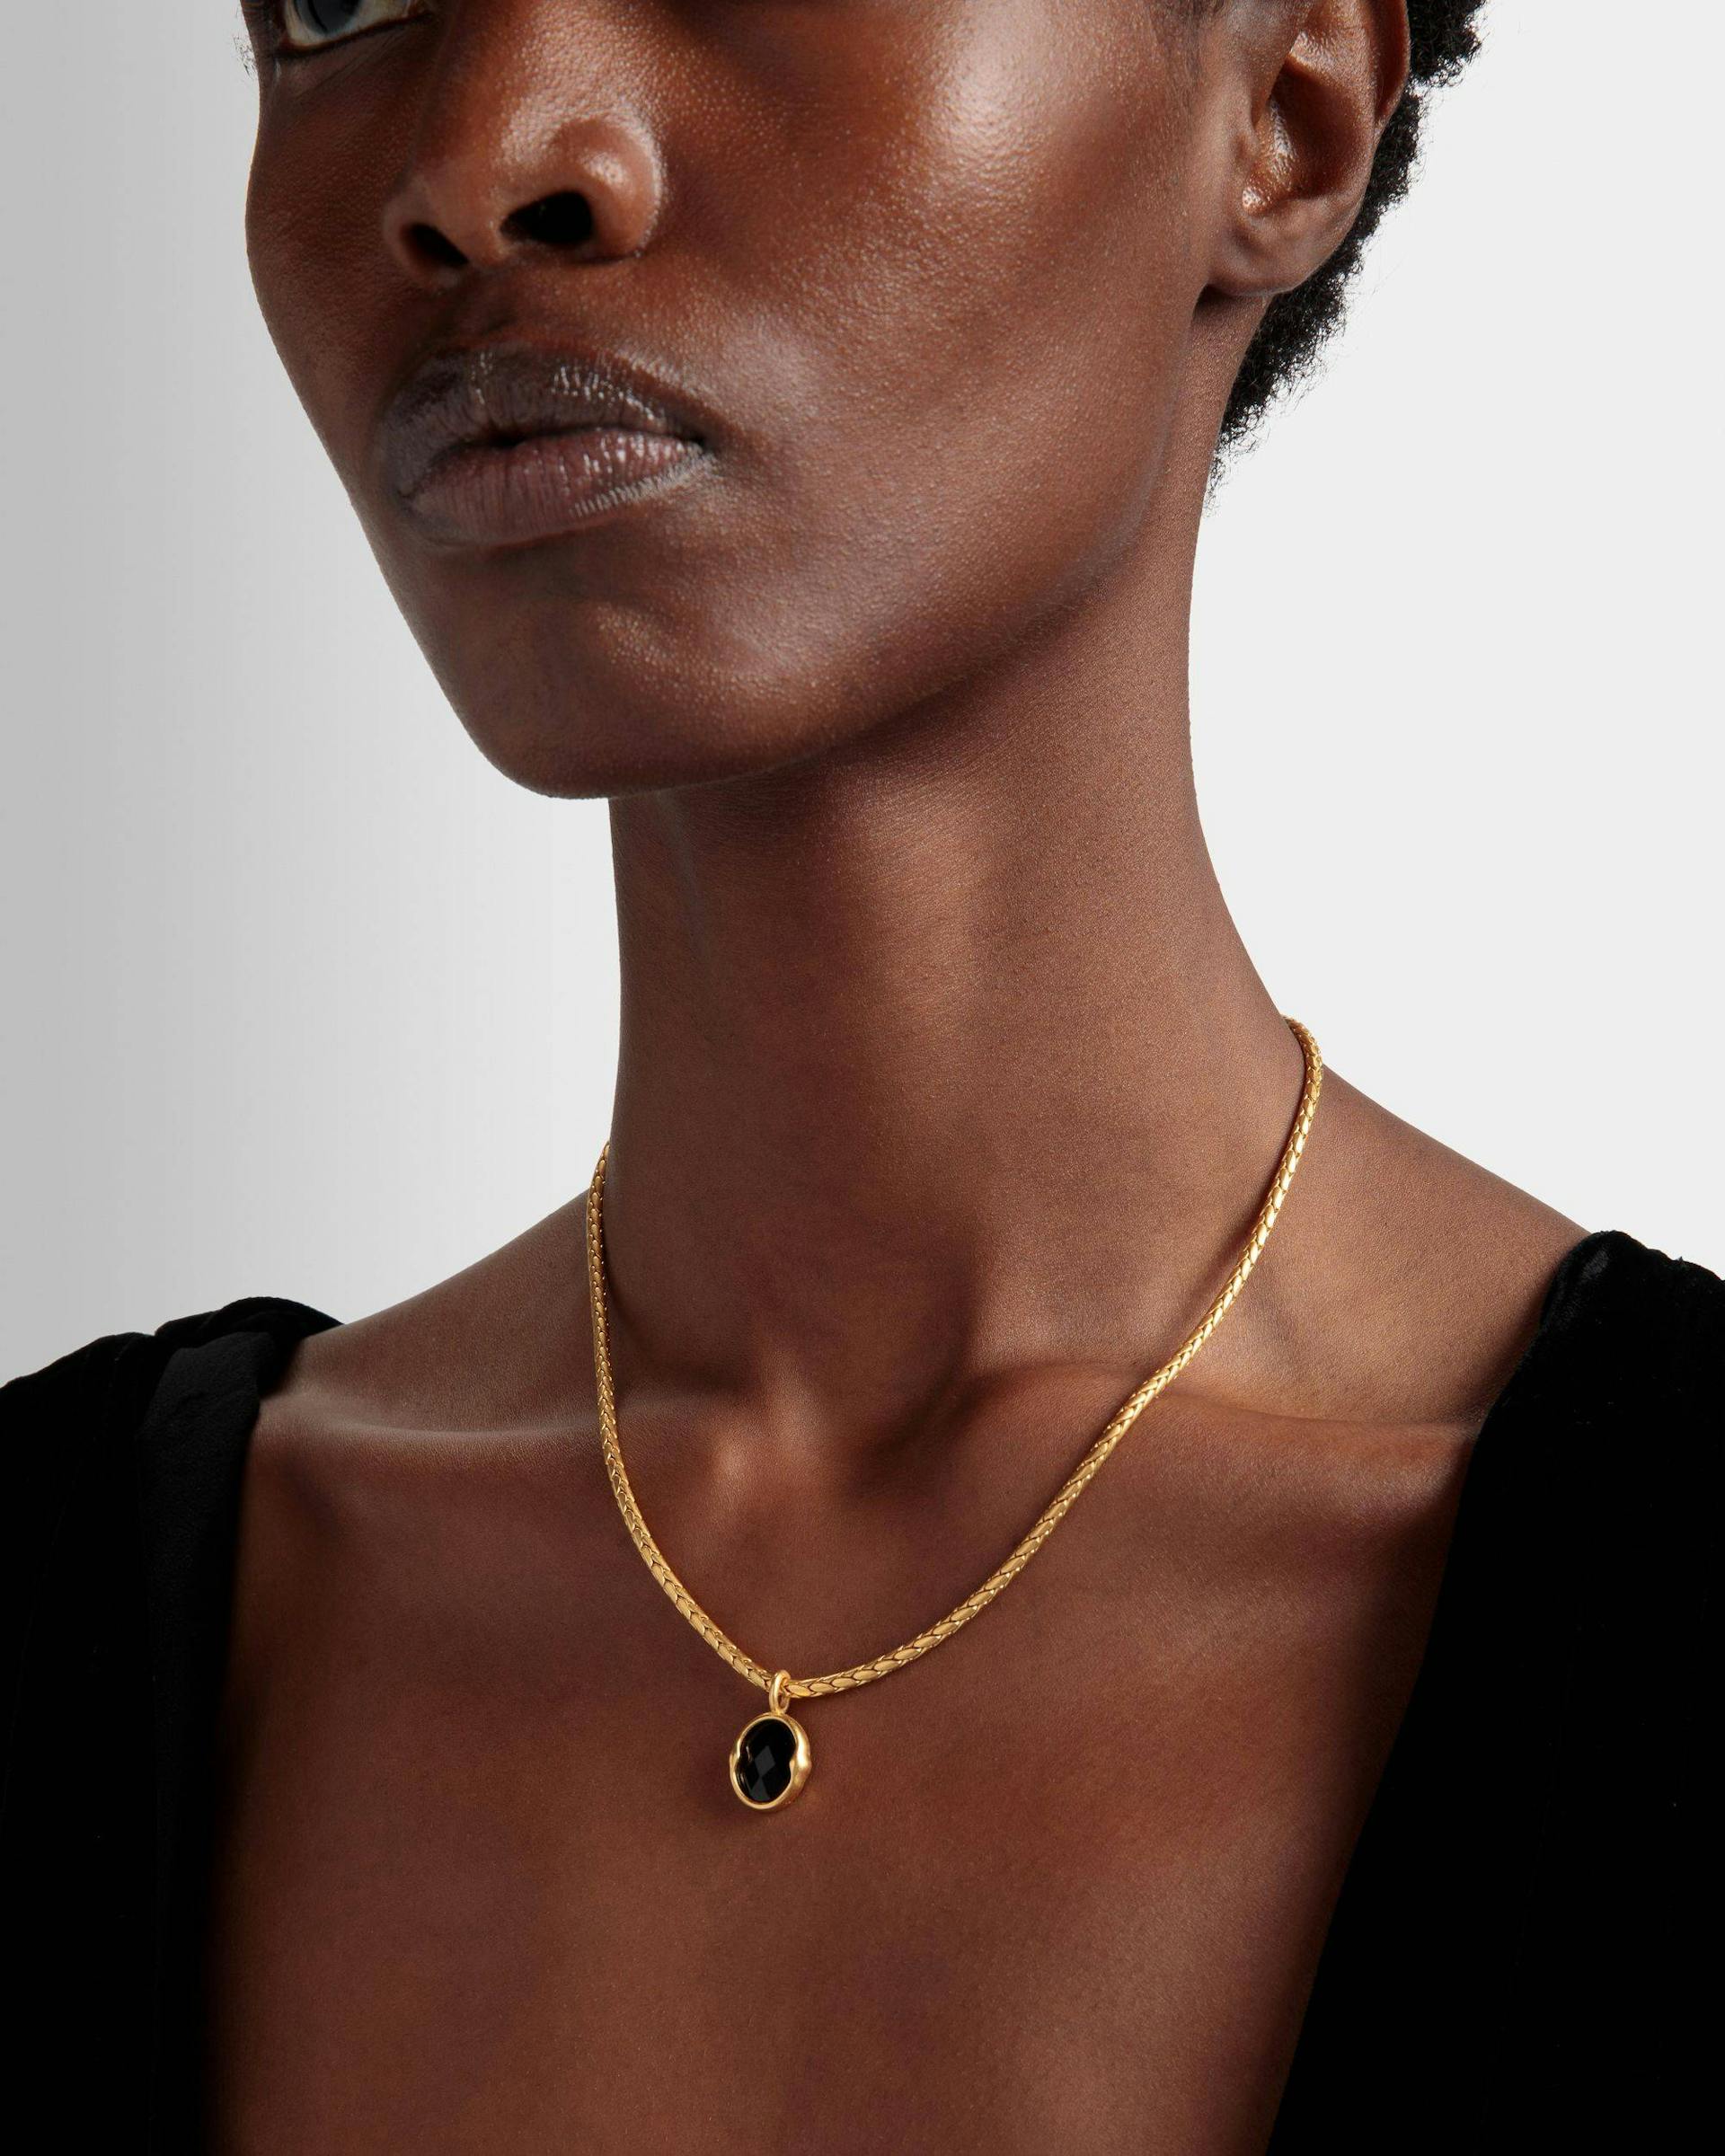 Frame Outline Necklace With A Snake Chain - Women's - Bally - 02